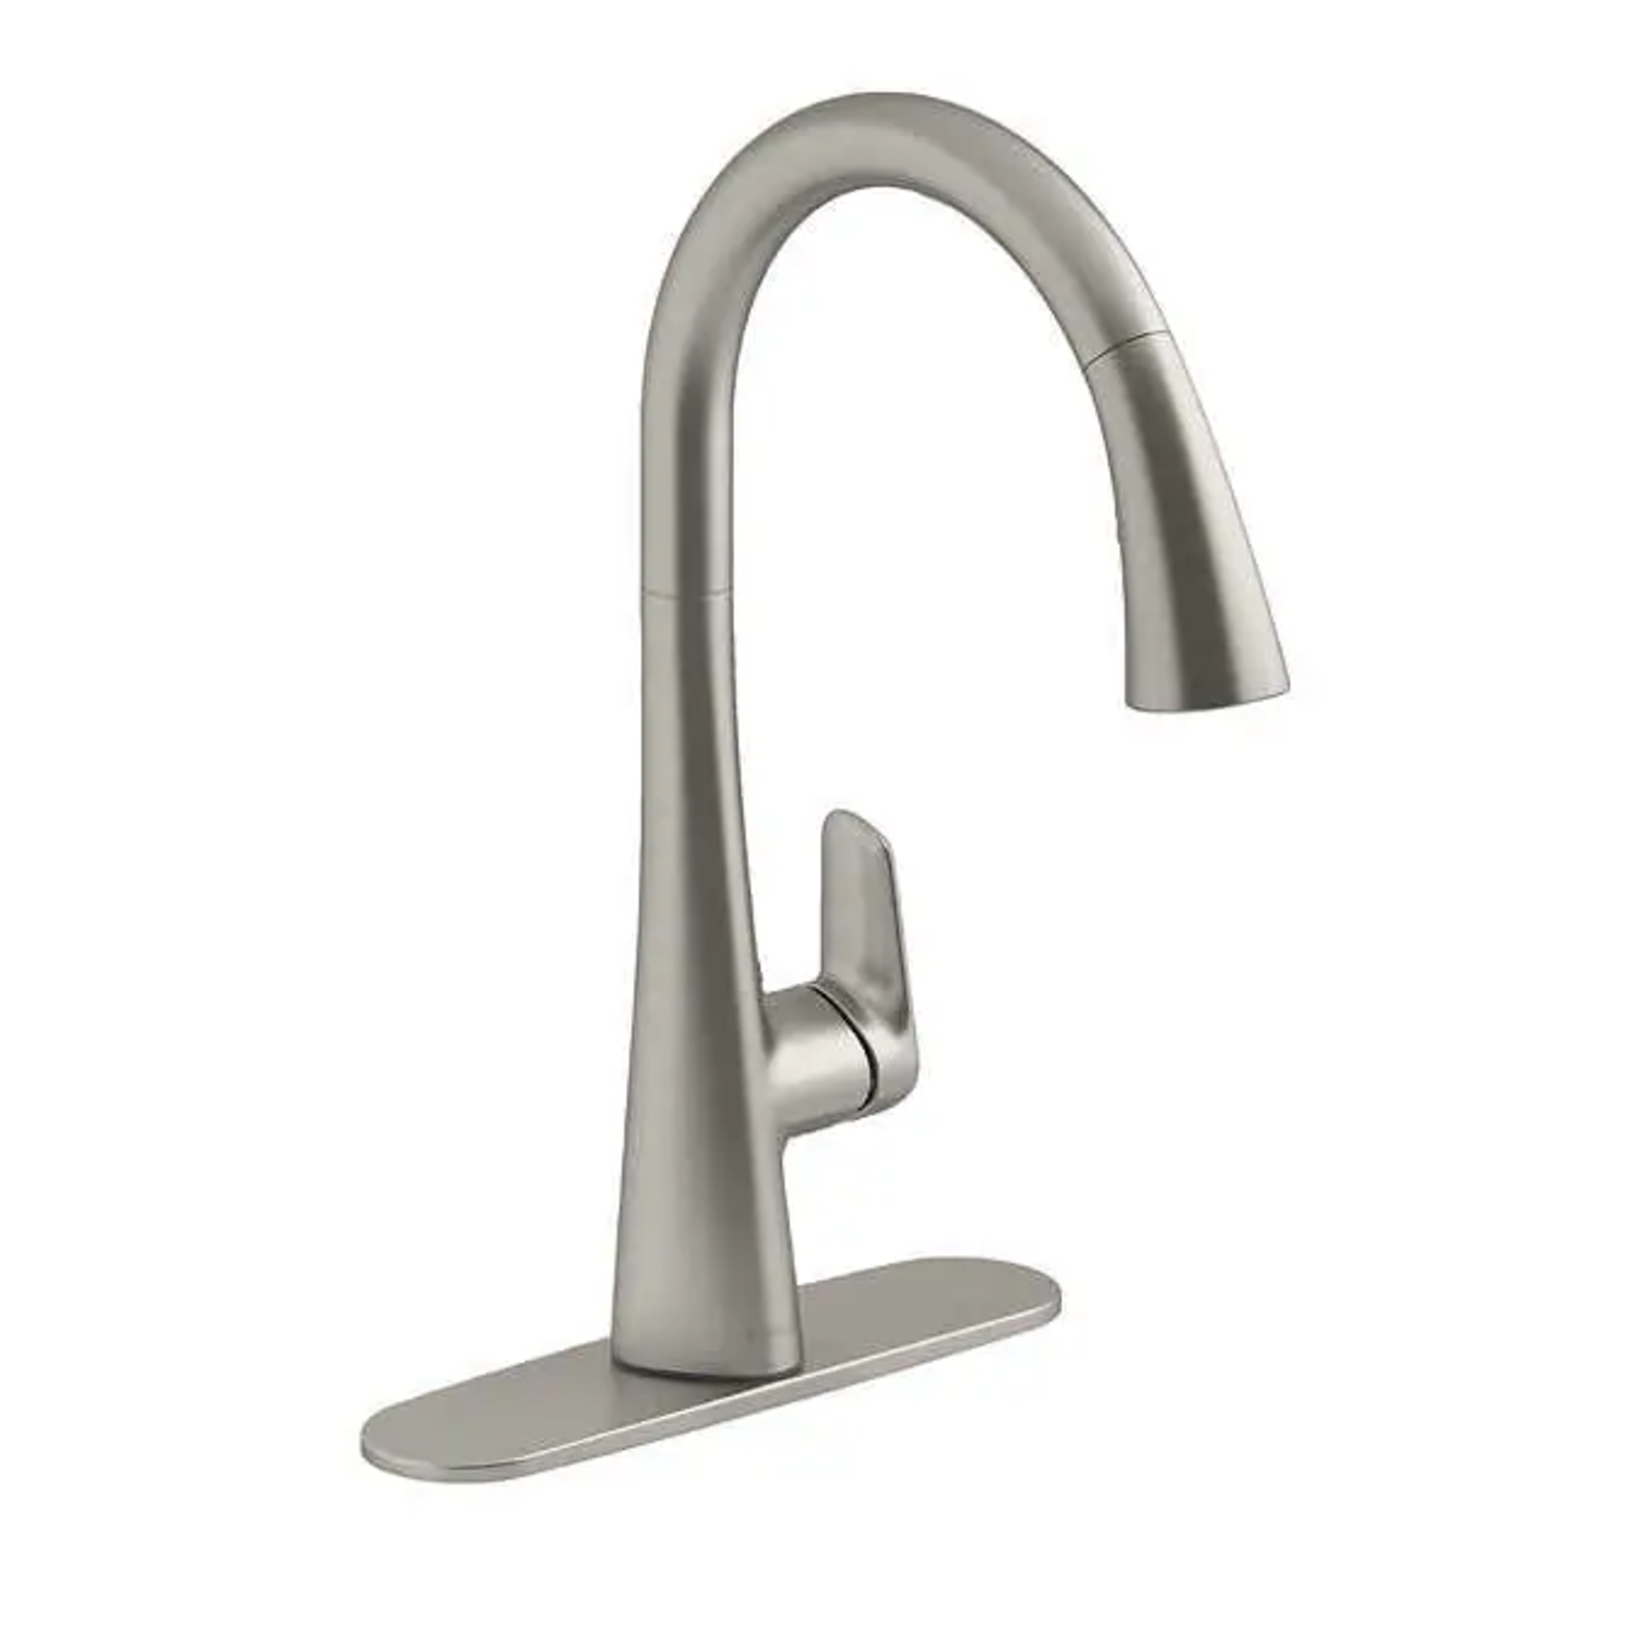 KOHLER ANESSIA TOUCHLESS KITCHEN PULL-DOWN FAUCET